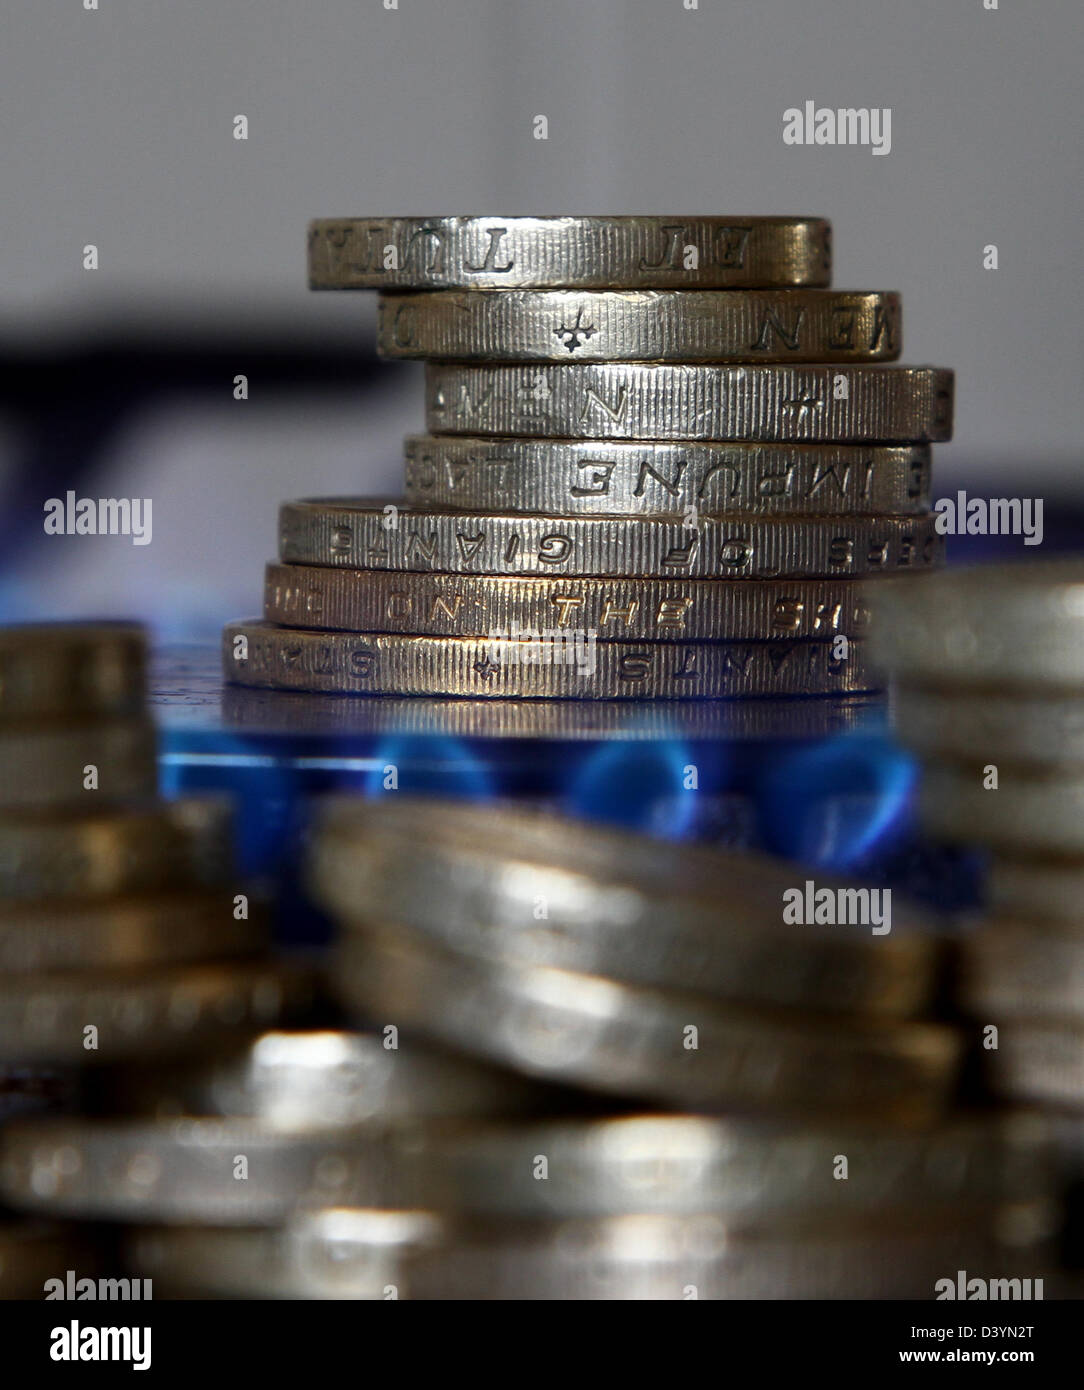 Lots of coin around a gas burner on a cooker. The owner of British Gas, Centrica, has seen operating profits rise by 14%. Stock Photo